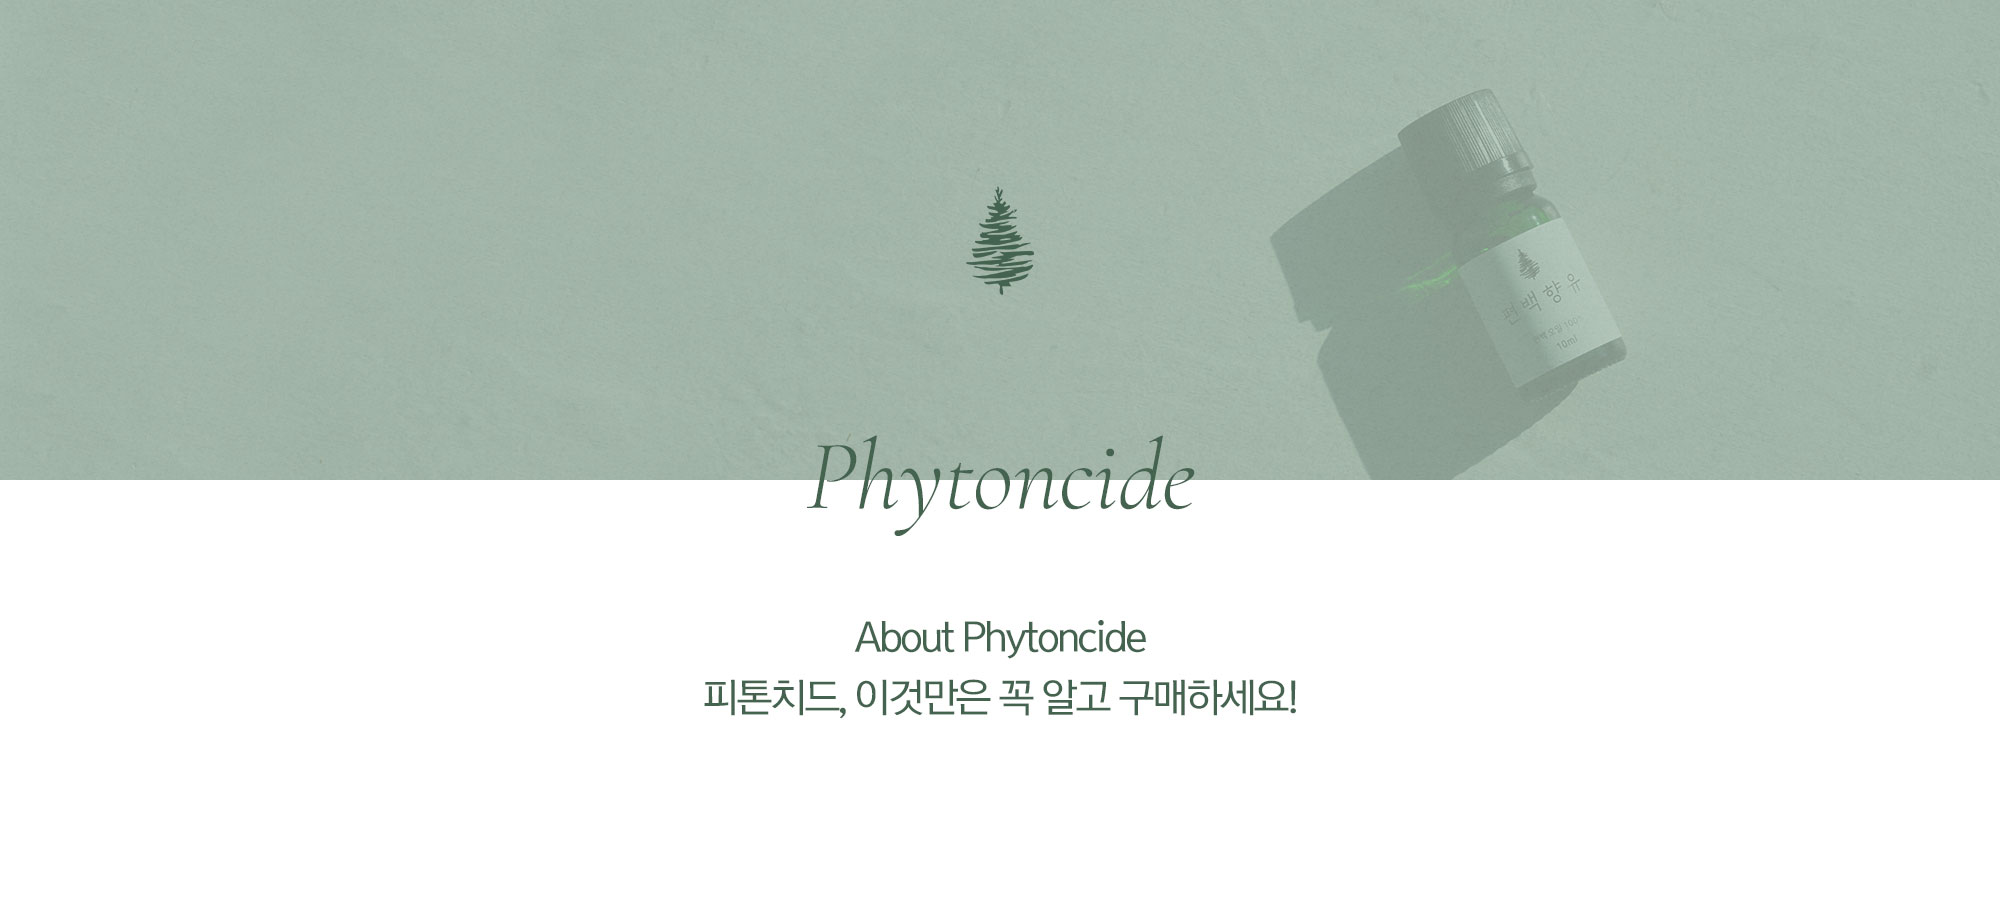 Phytoncide